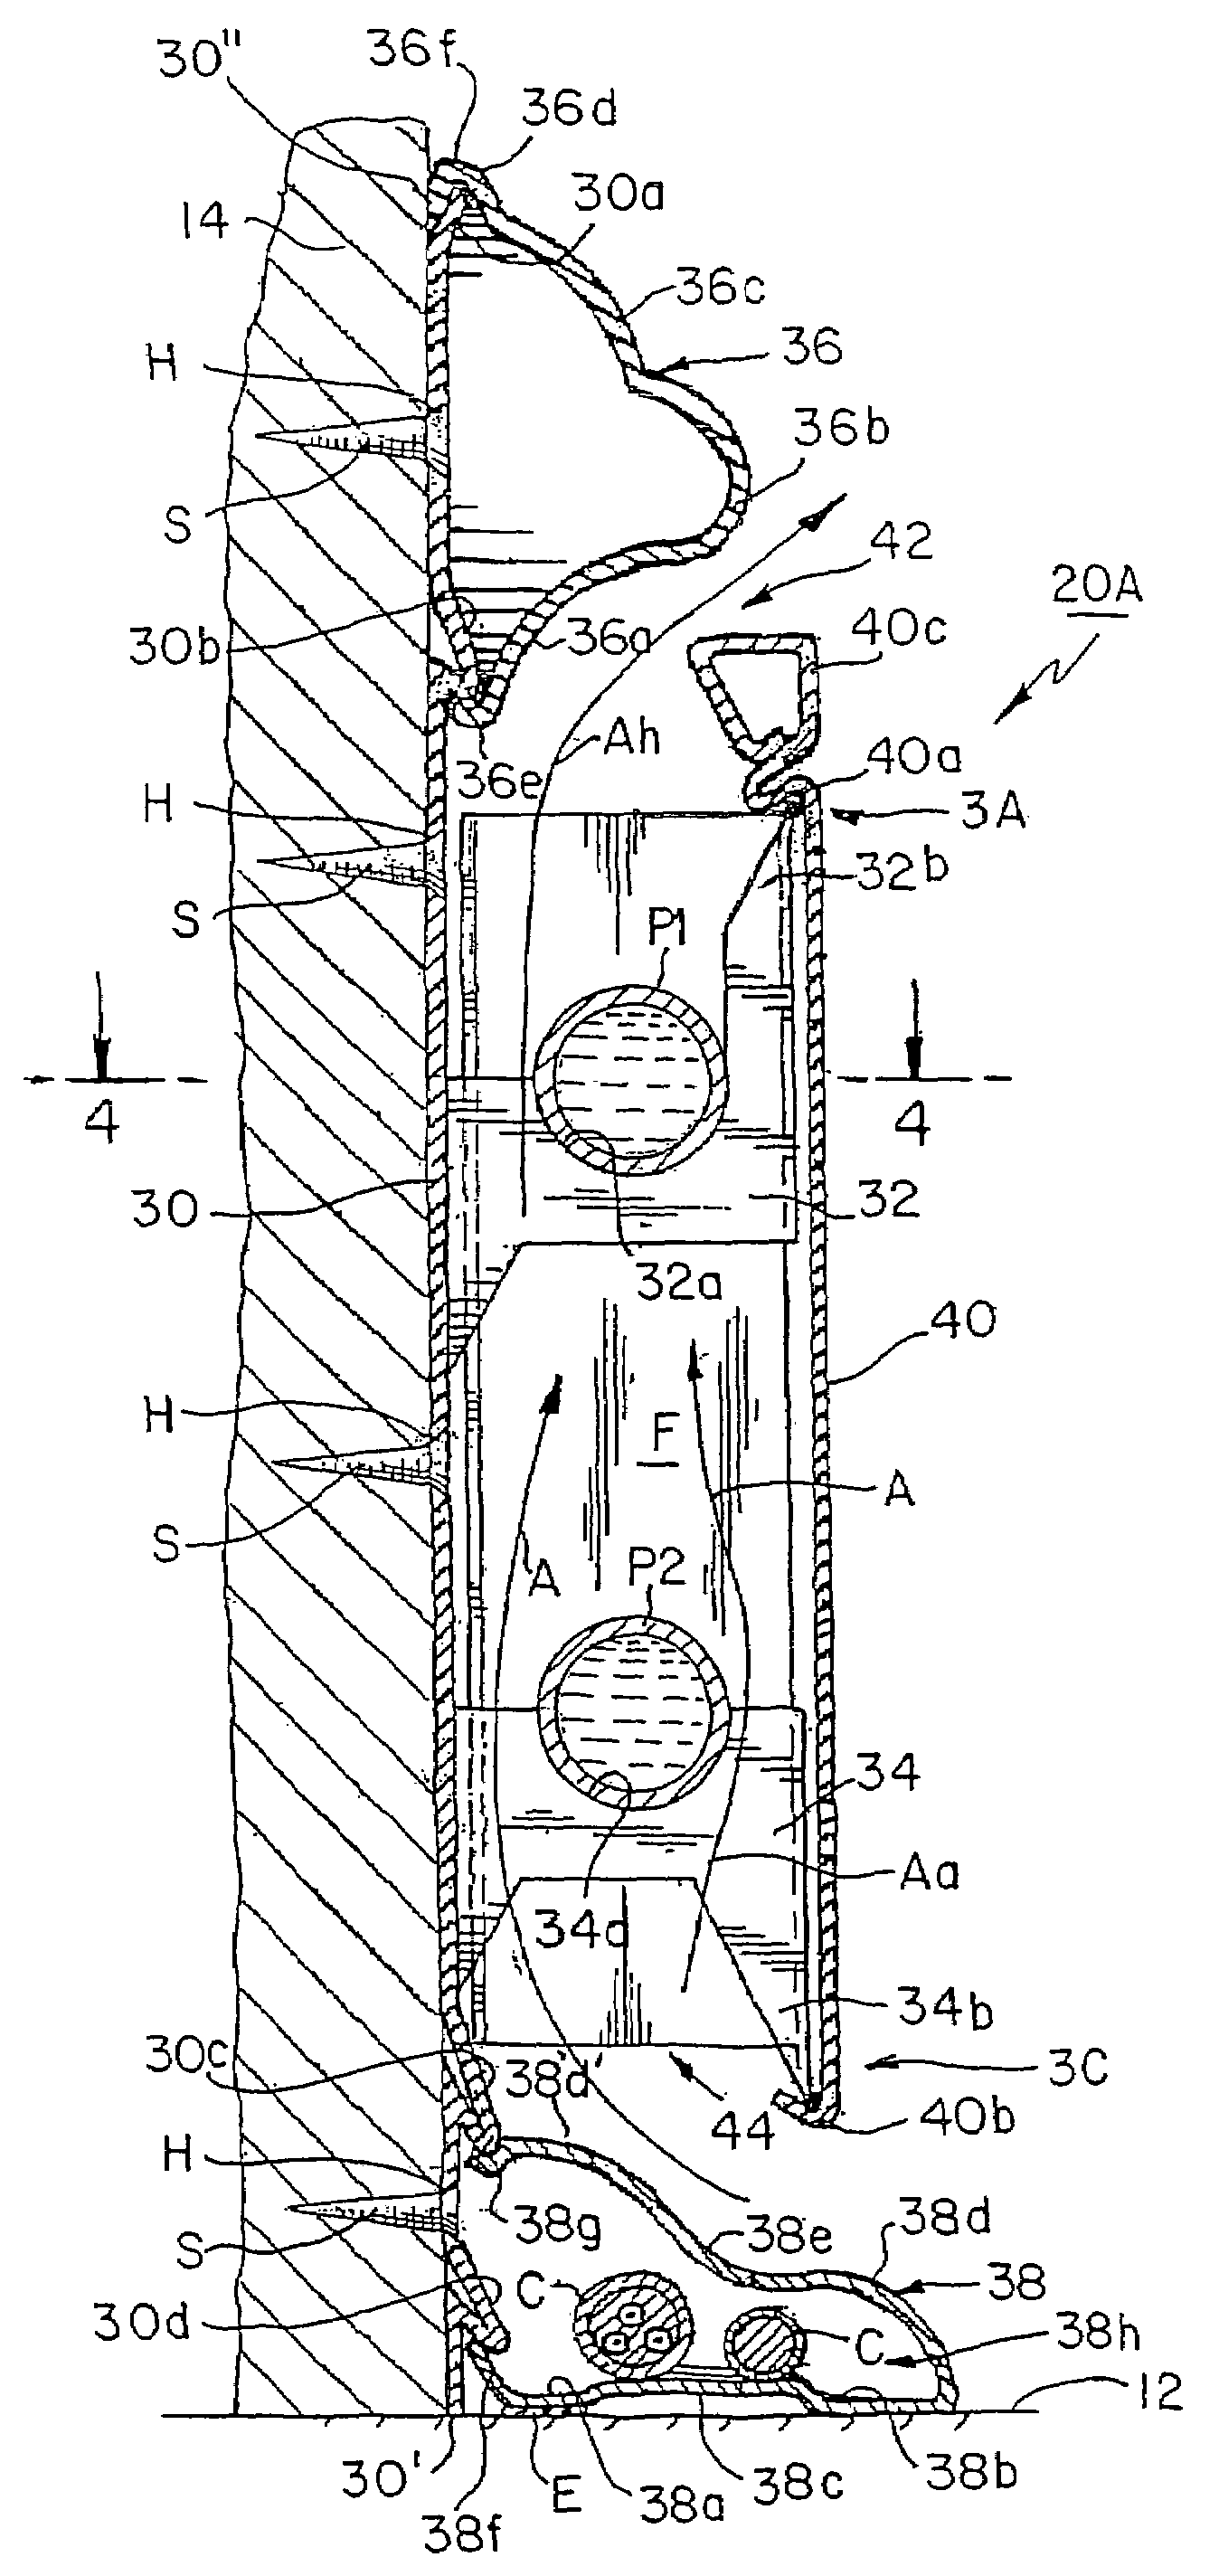 Baseboard and molding system